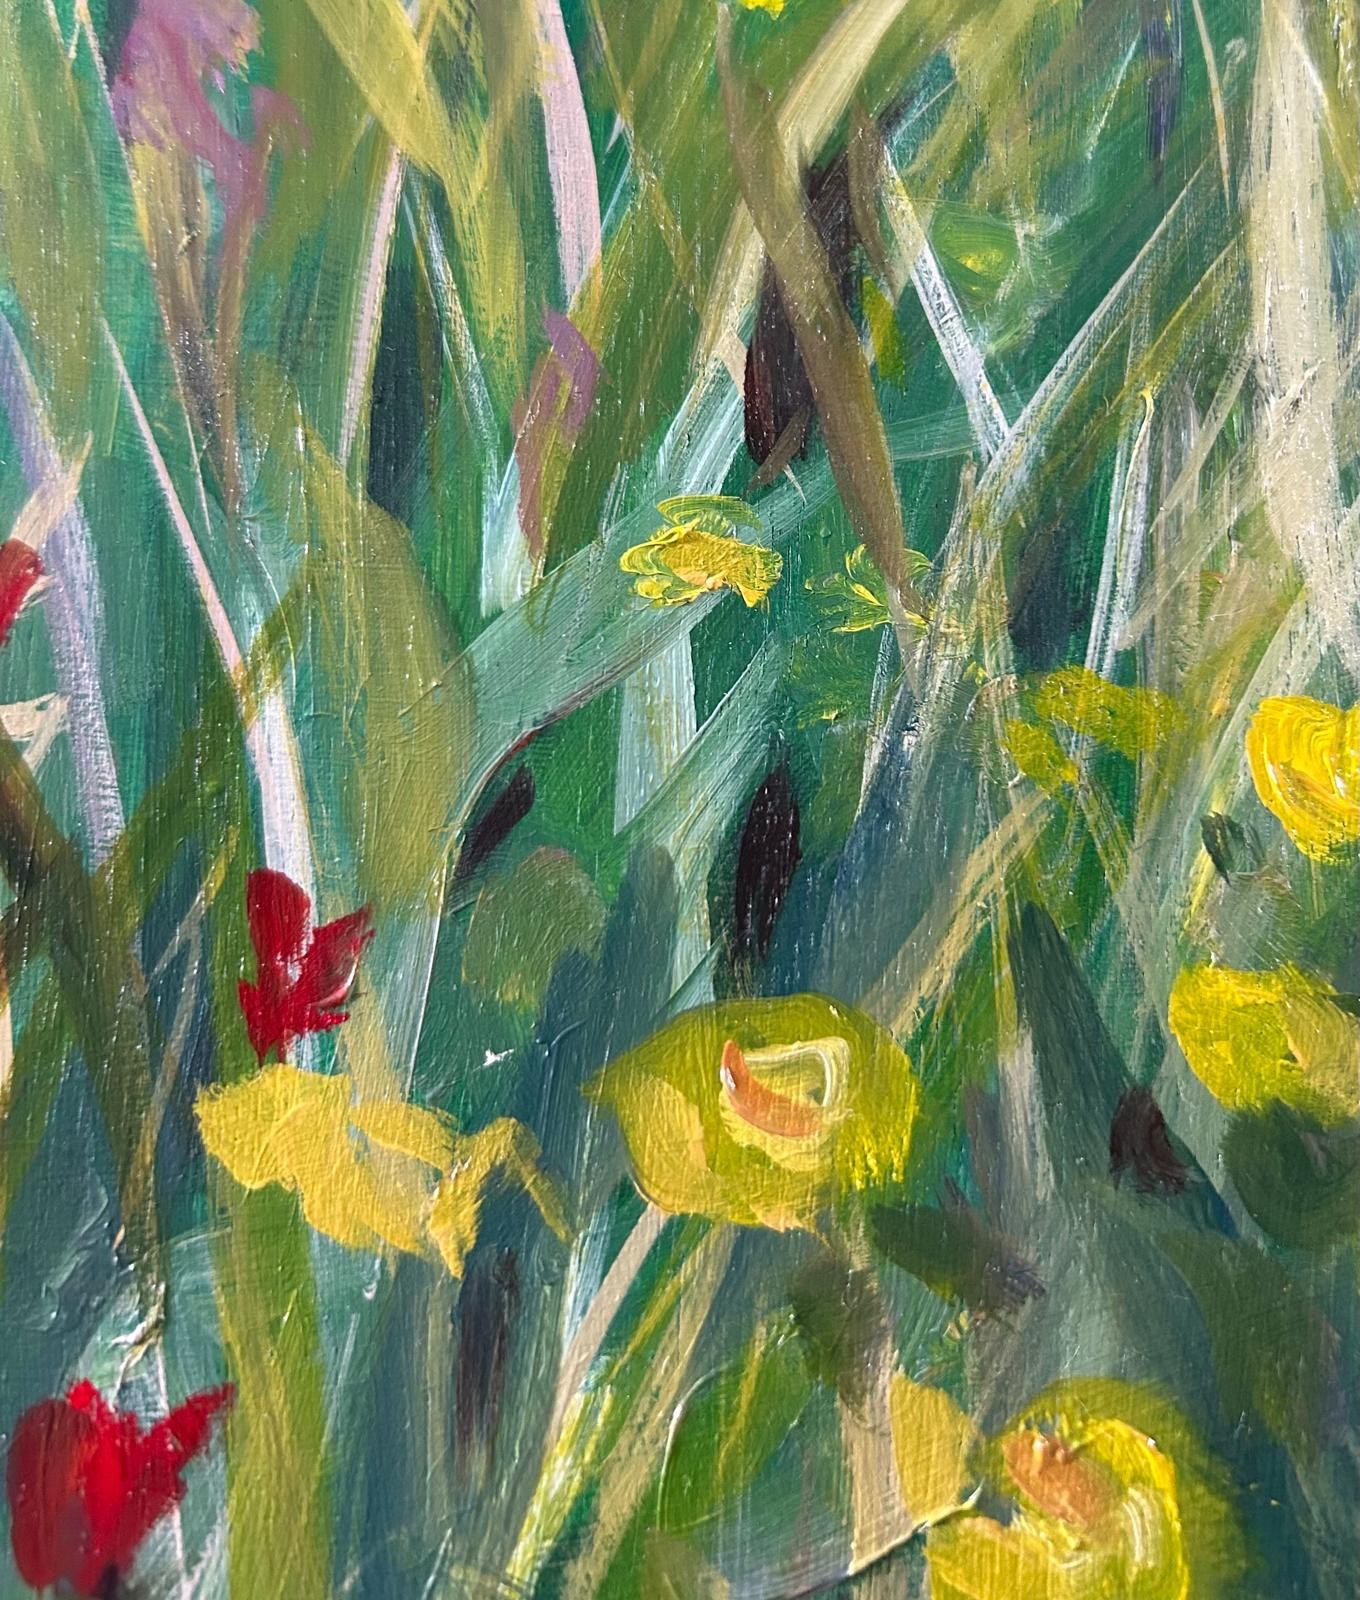 A painting with yellow and red flowers